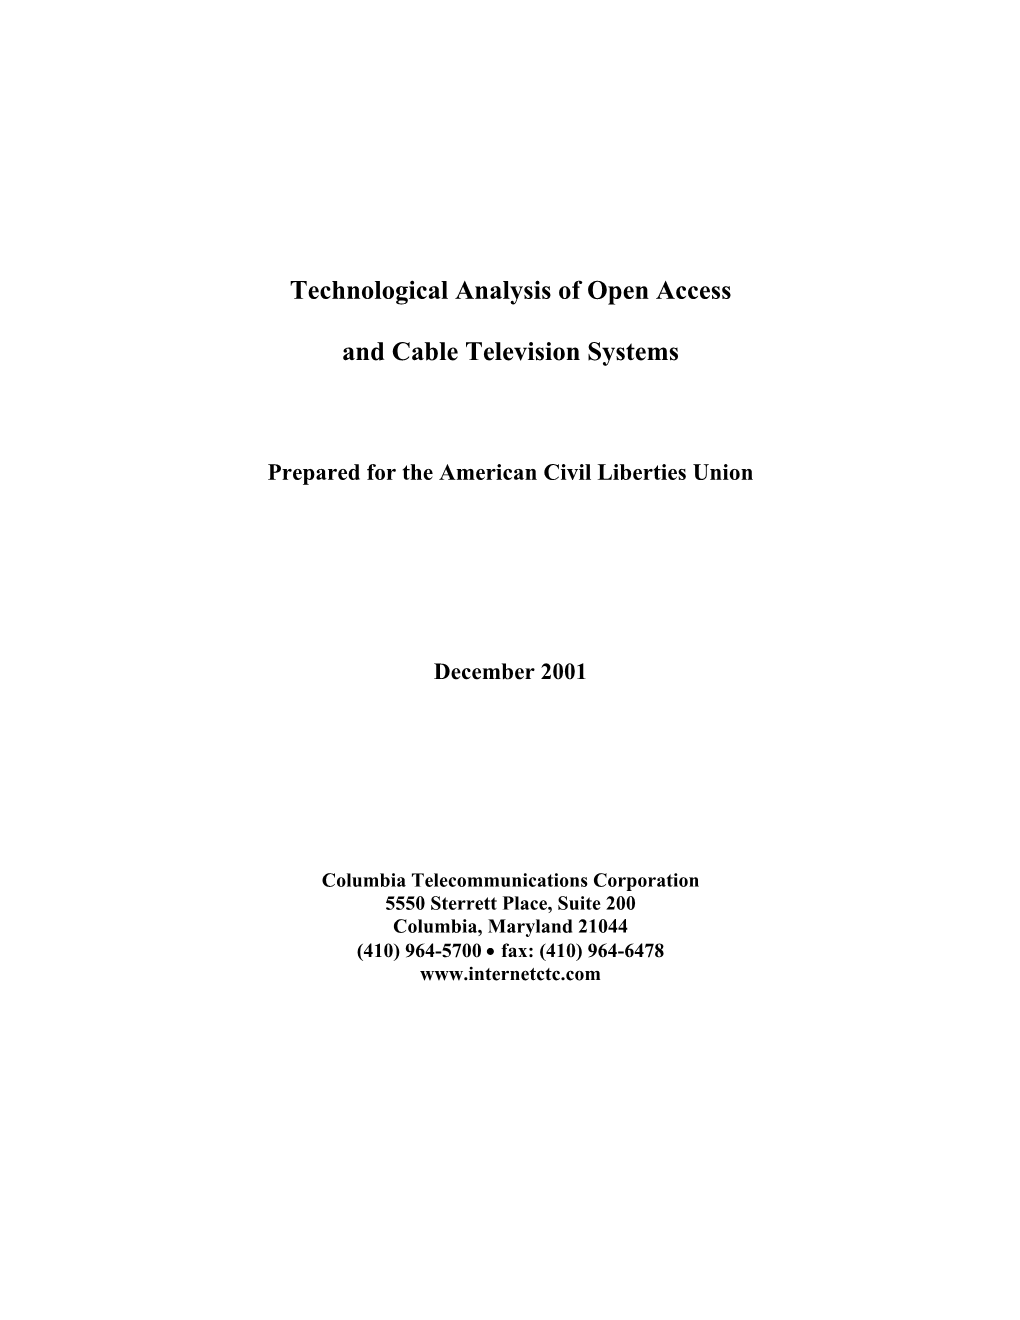 Technological Analysis of Open Access and Cable Television Systems